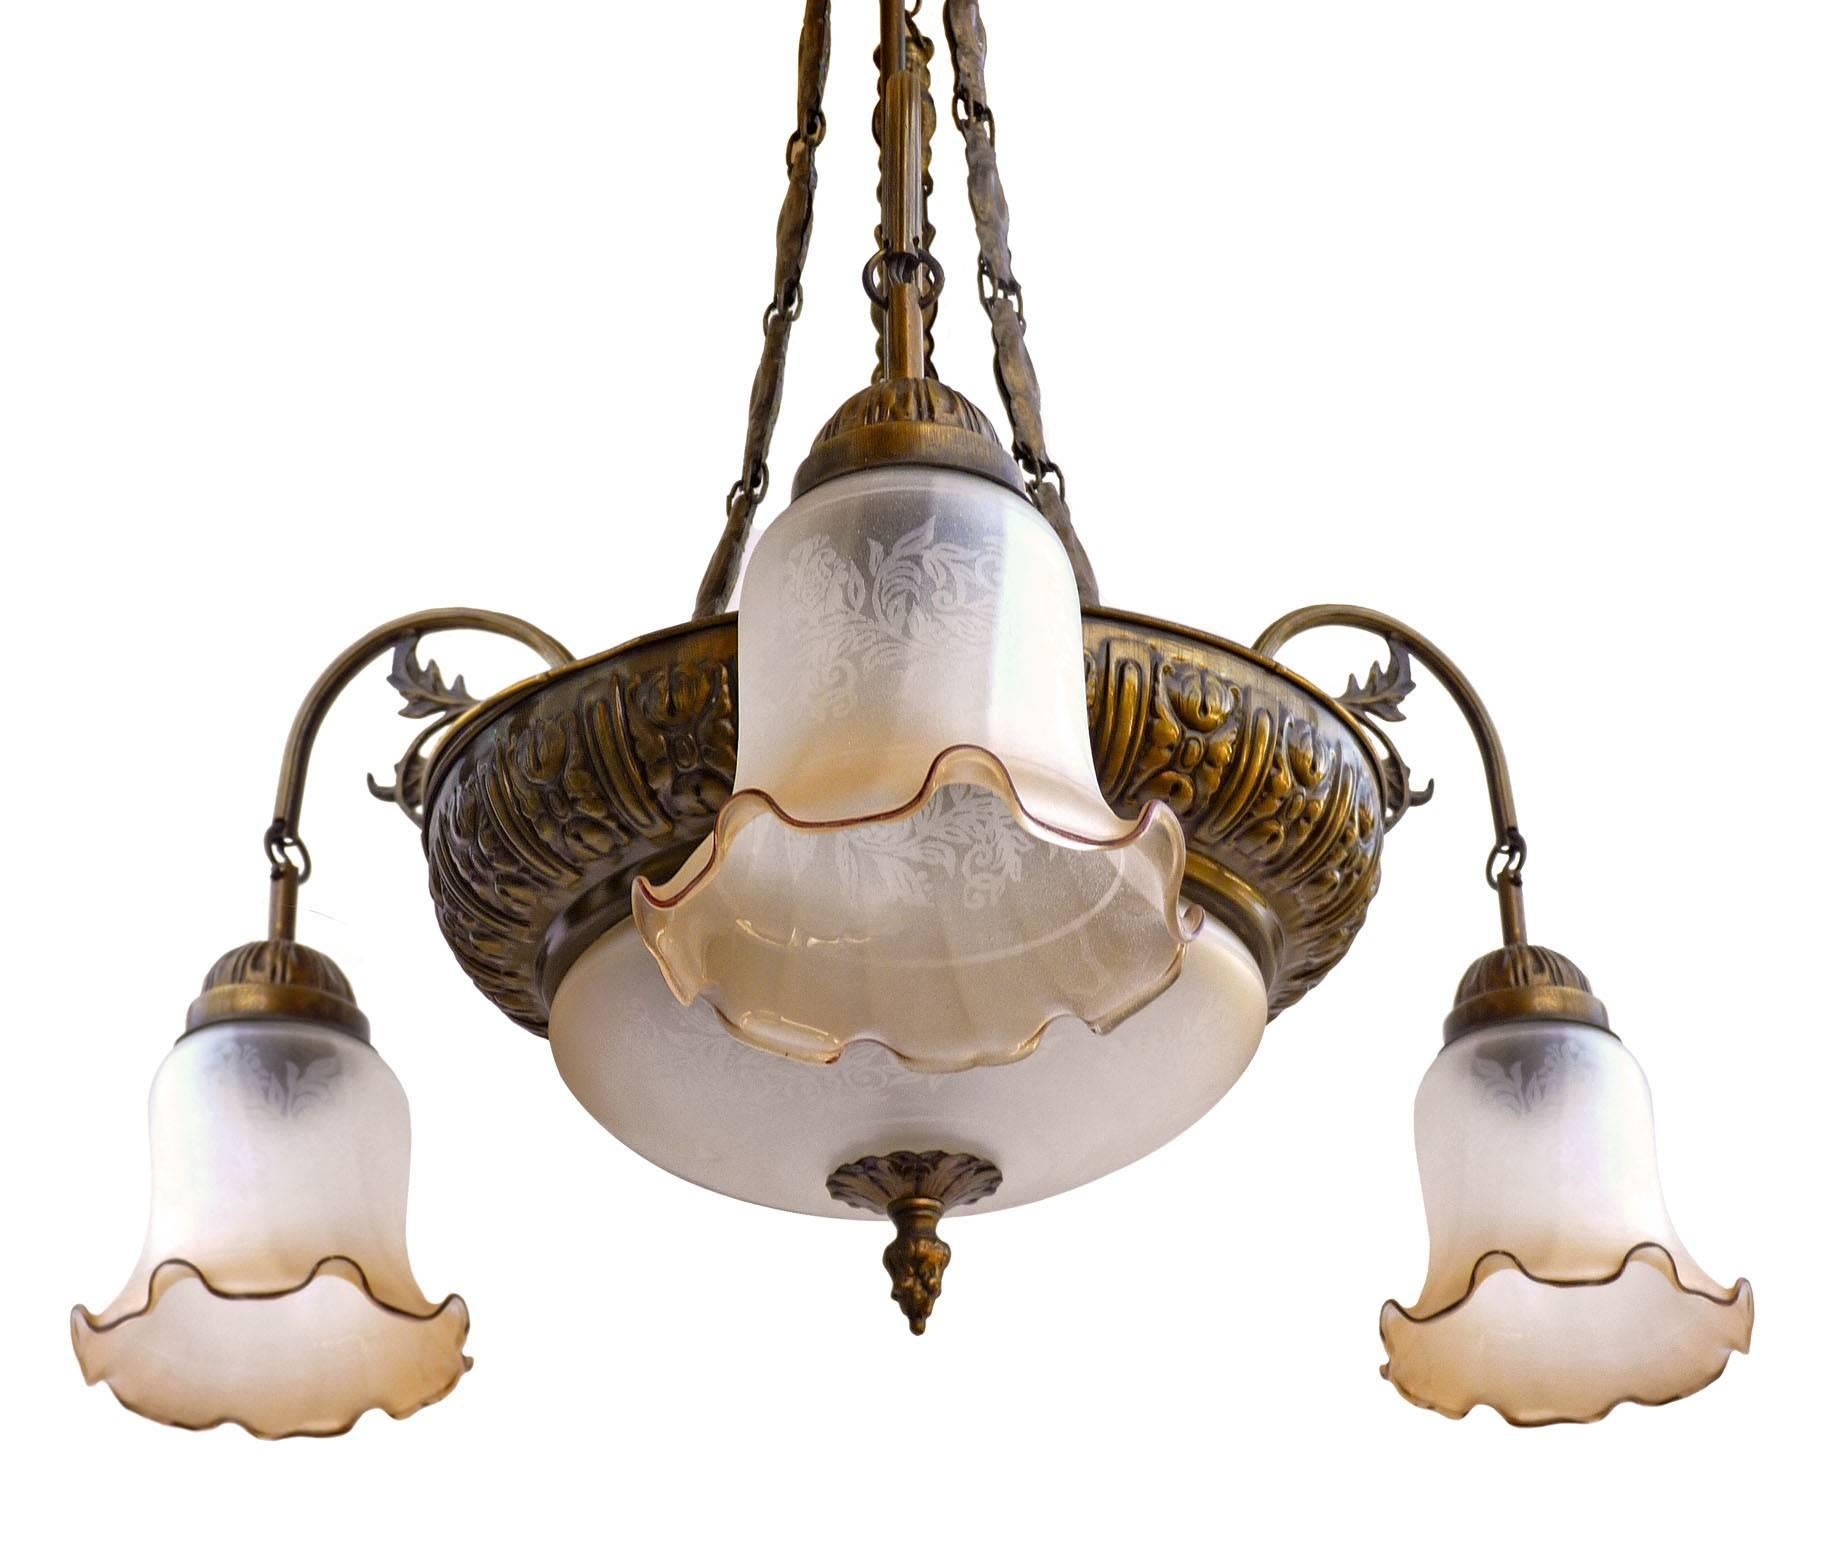 Antique French Art Deco or Art Nouveau Bronze and Gold Color, Etched Glass Five Light Chandelier
Beautiful age patina
Measures:
Diameter 26 in / 66 cm
Height 24 in / 60 cm 
Glass shades 6 in (15 cm) / 5.5 in (13 cm)
Dome: 10 in (25 cm) / 4 in (10